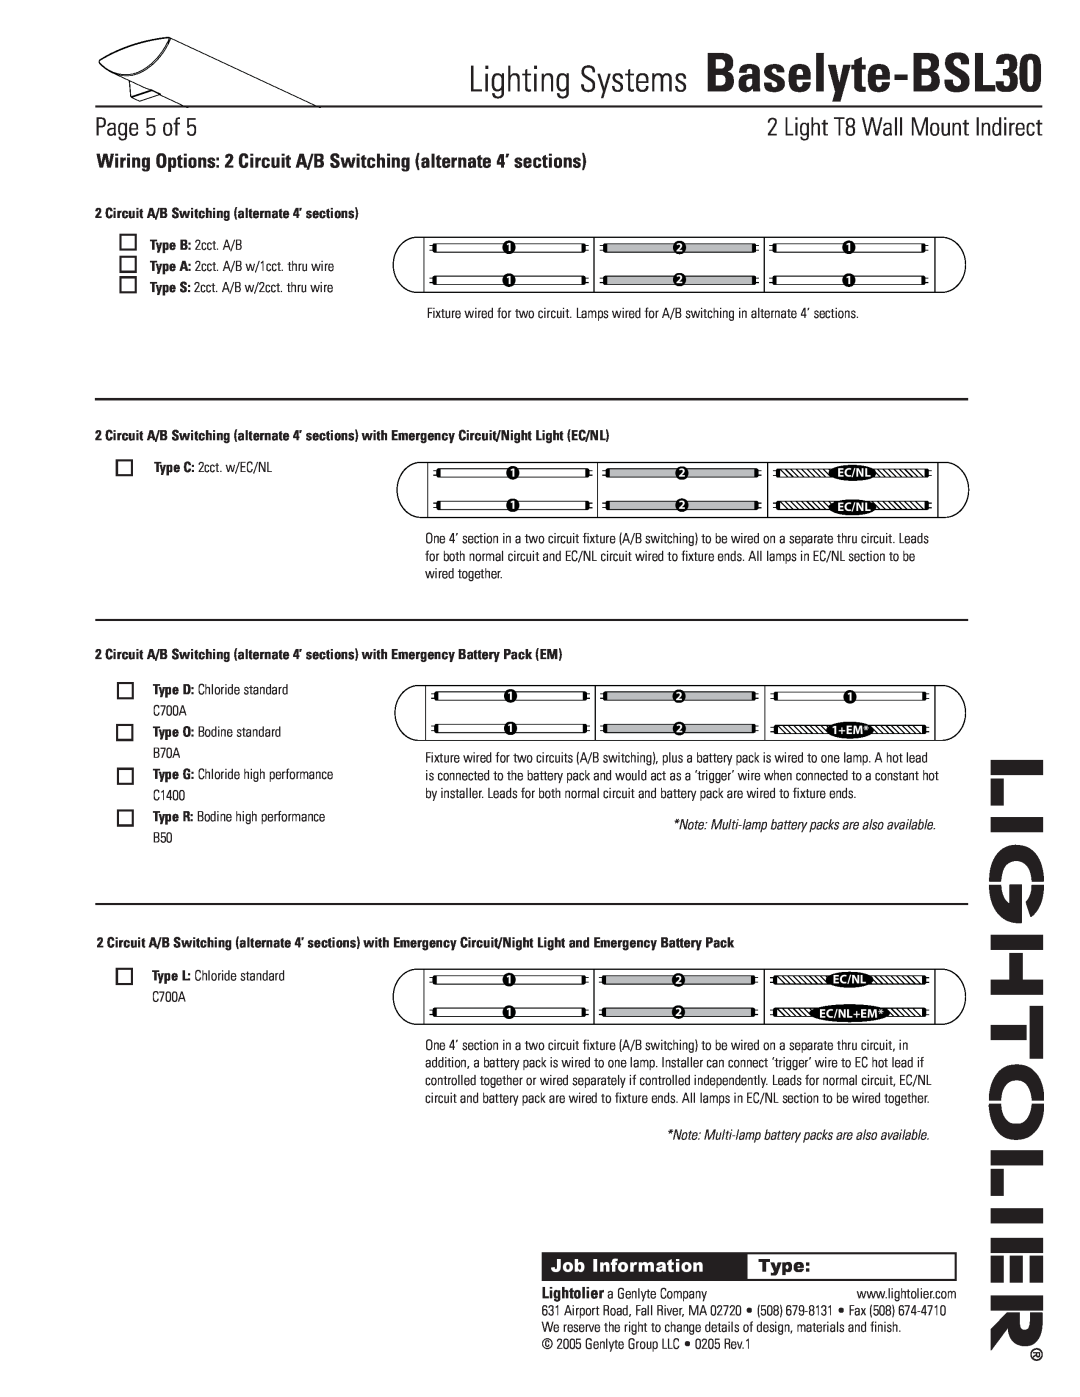 Lightolier Baselyte-BSL30 specifications Circuit A/B Switching alternate 4’ sections, Type O Bodine standard B70A, Page of 